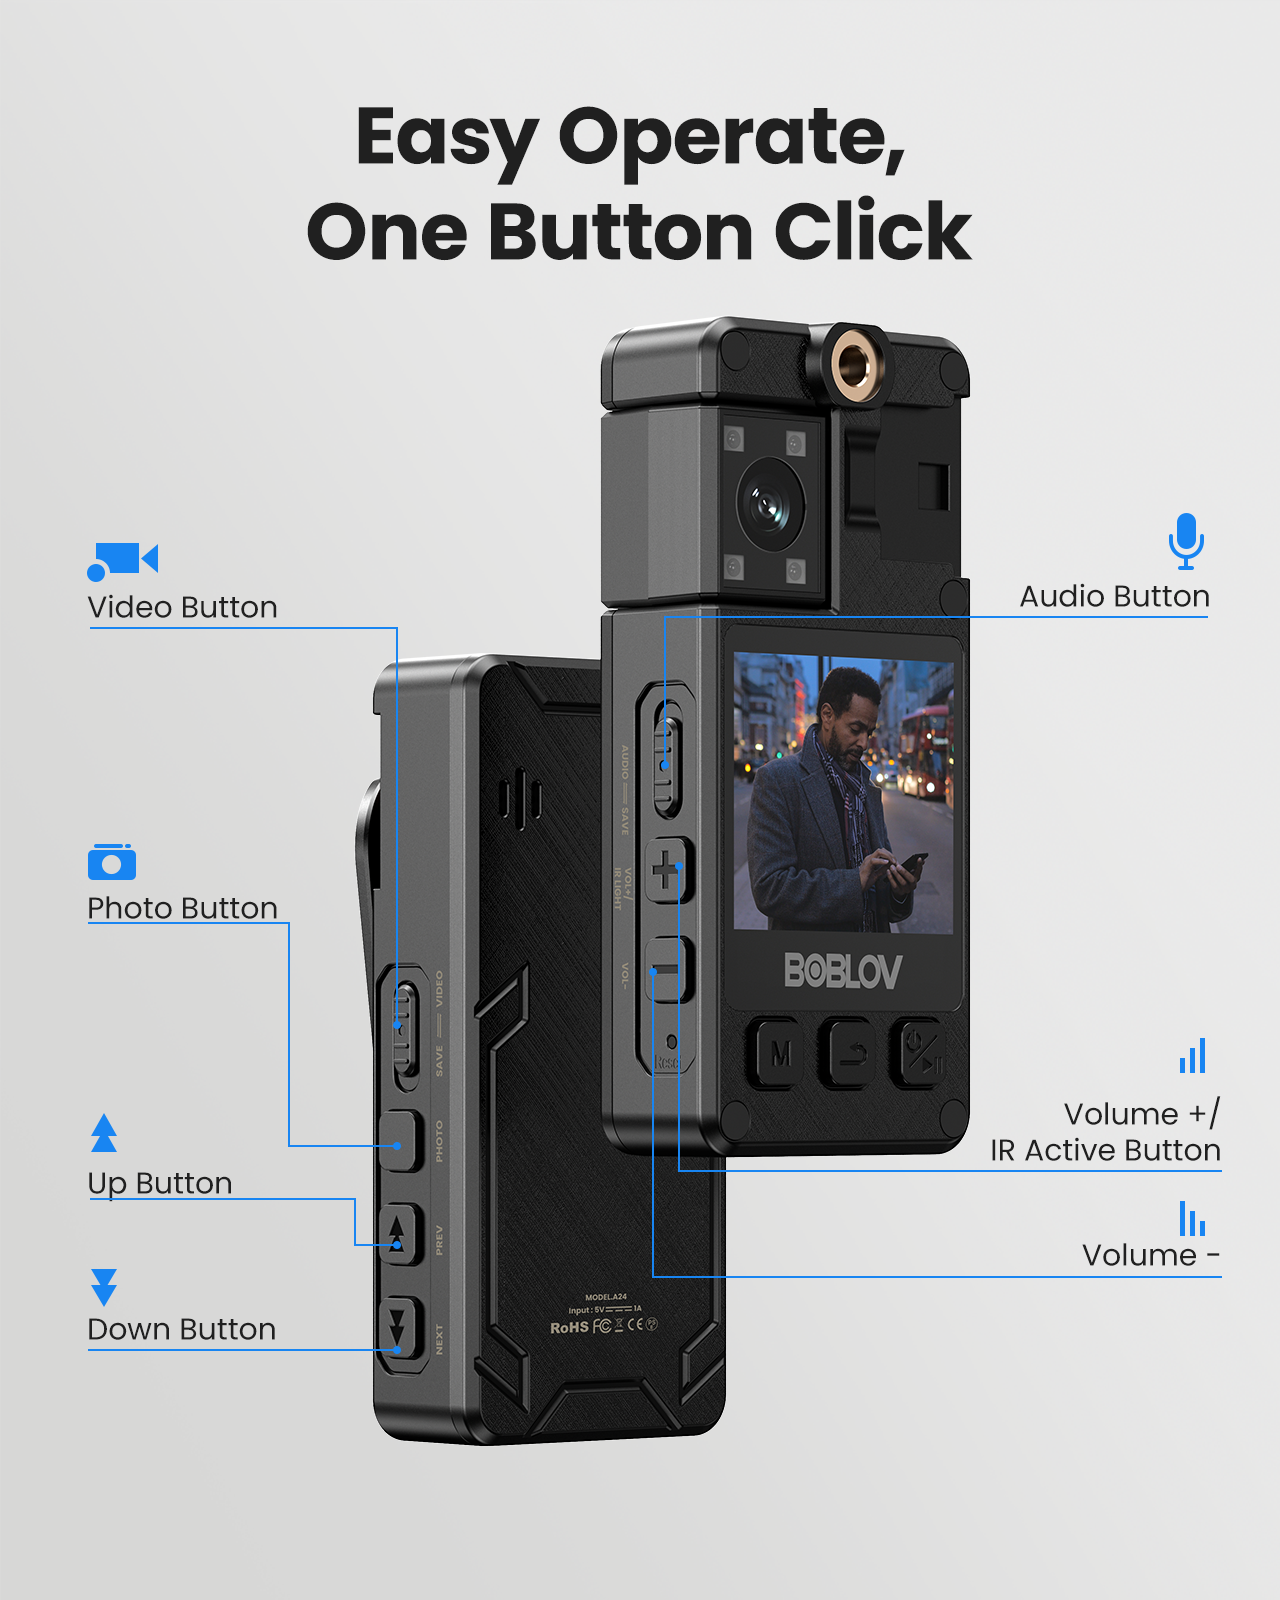 BOBLOV A24 1296P Mini Body Camera with 64GB storage and 180-degree rotation, capable of 8 hours video recording1